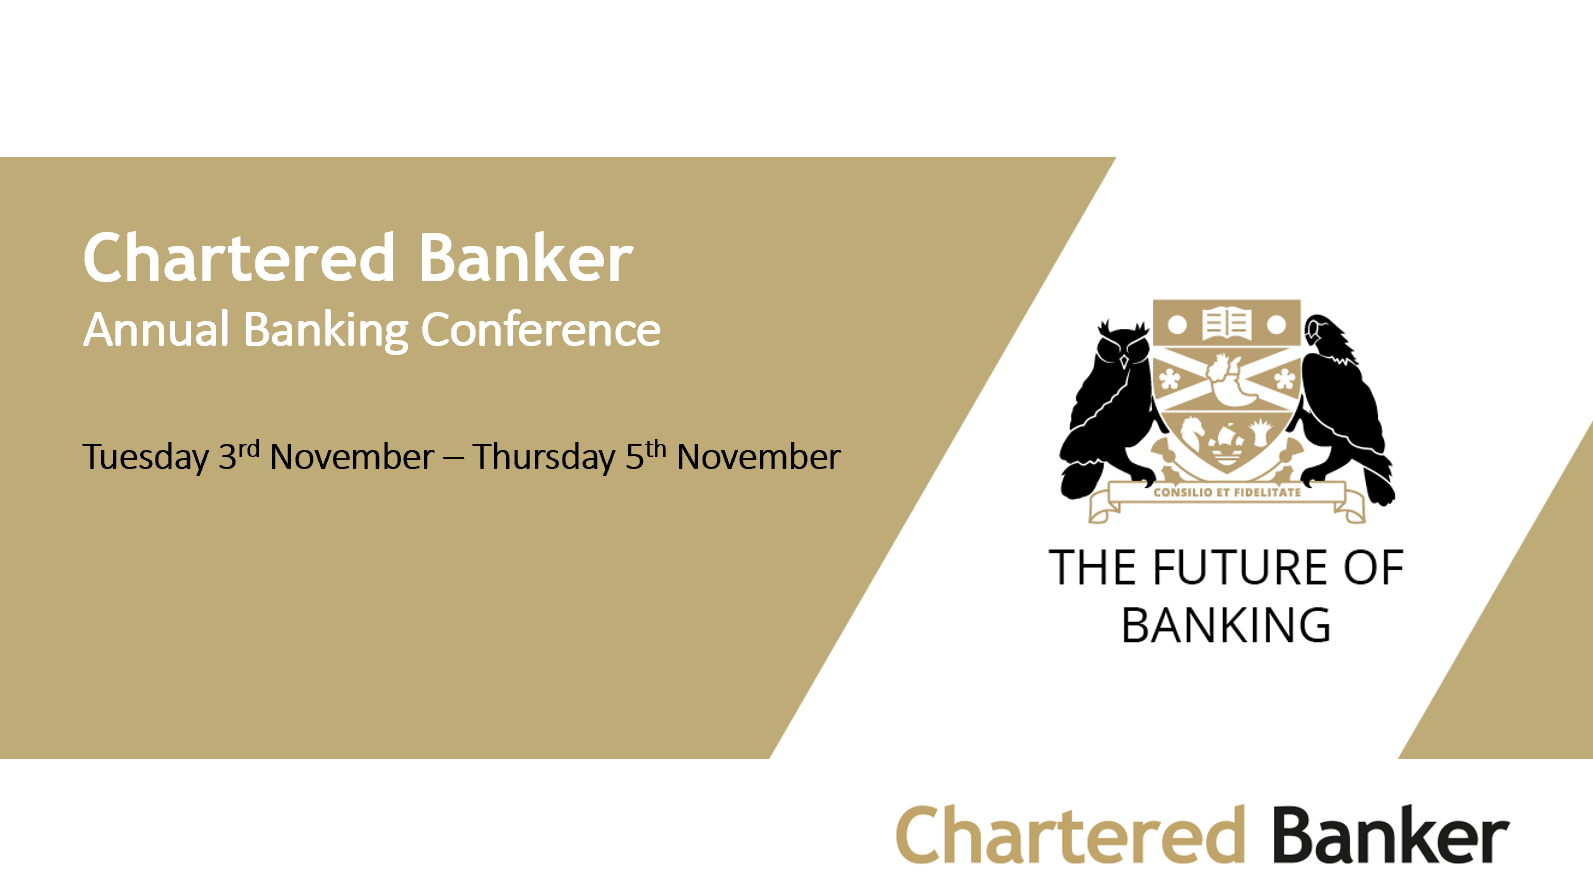 Chartered Banker Annual Banking Conference - You don’t know what you don’t know!